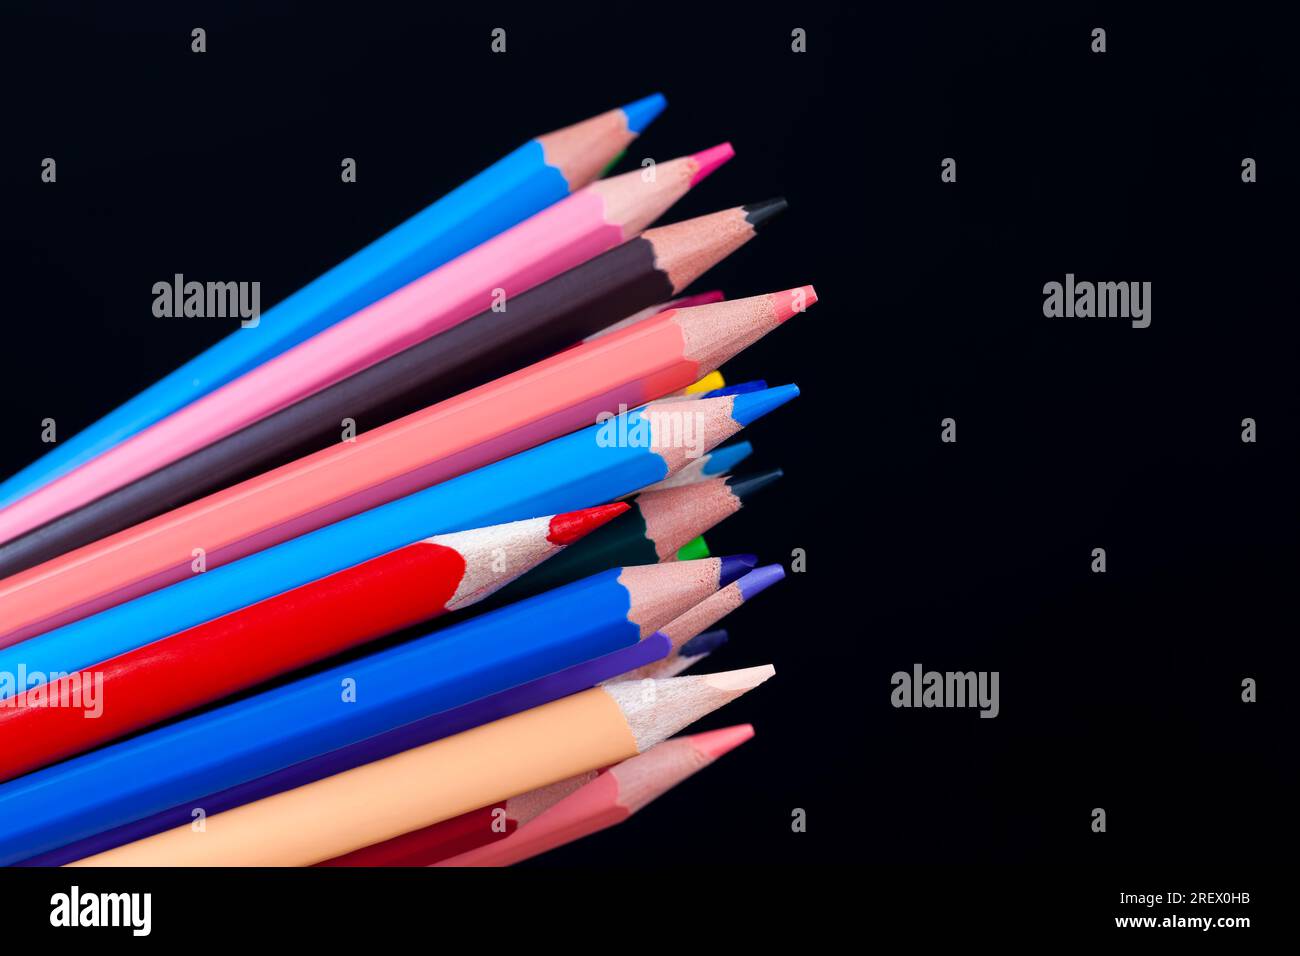 https://c8.alamy.com/comp/2REX0HB/colored-wooden-pencils-with-a-different-color-lead-for-drawing-and-creativity-close-up-pencils-made-of-natural-eco-friendly-materials-safe-for-childr-2REX0HB.jpg